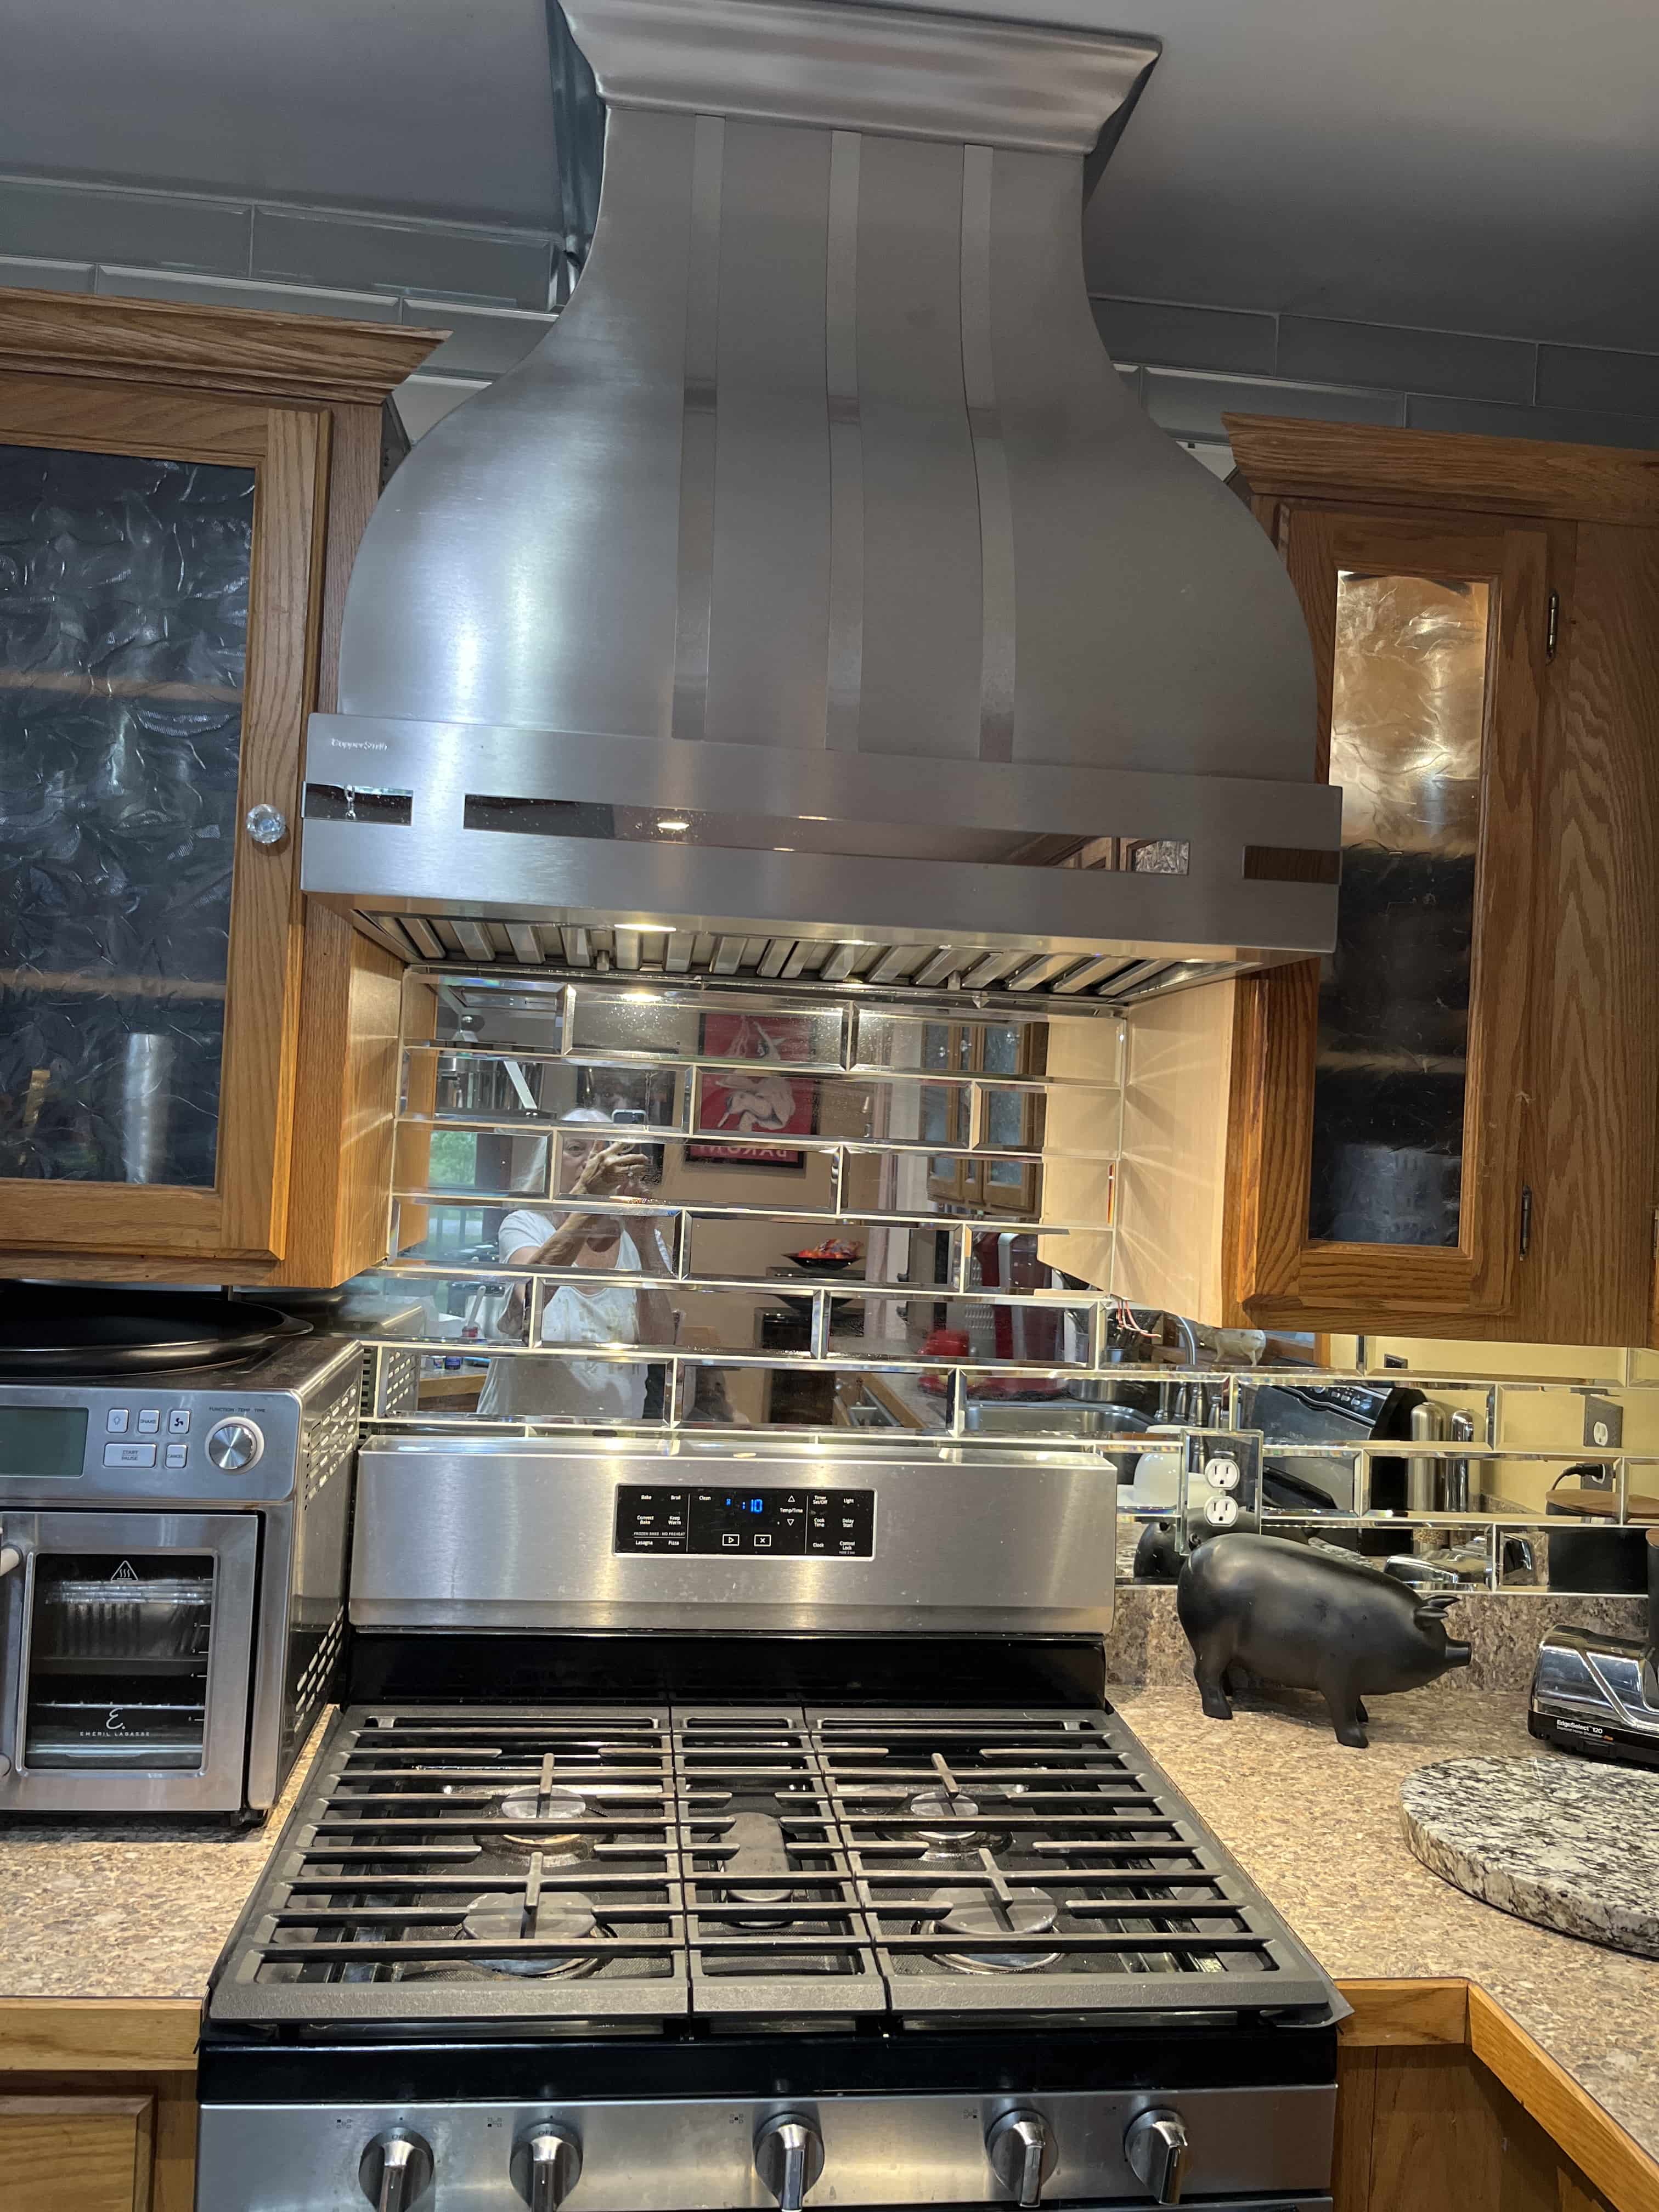 CopperSmith Artisan AT3 Wall Mount Brushed Stainless Steel Range Hood with Polished Stainless Steel Straps in a rustic style kitchen with wood cabinets brown countertops and metal backsplash